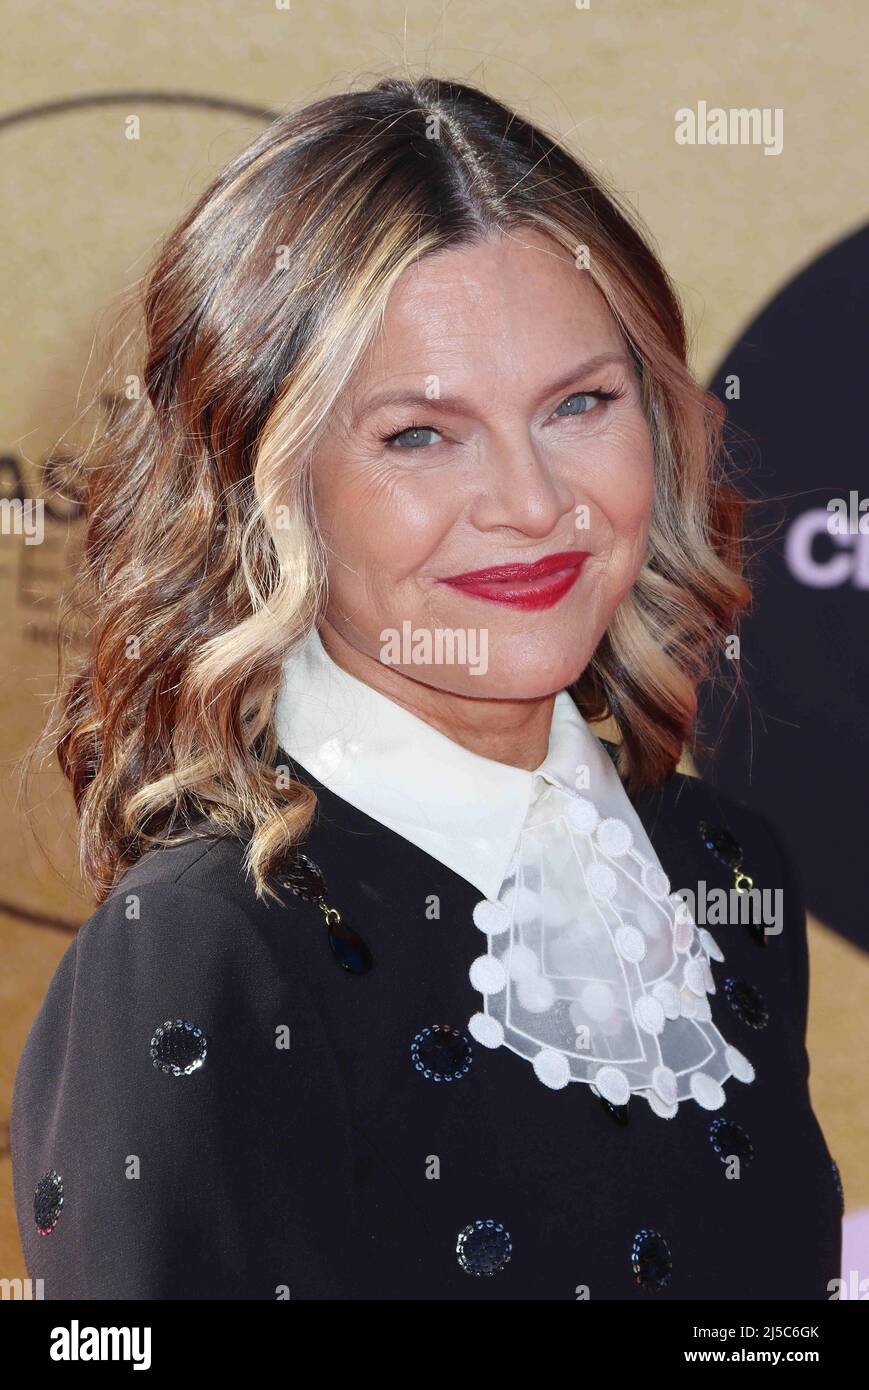 Los Angeles, USA. 21st Apr, 2022. Pola Changnon 2022/04/21 The 40th Anniversary Screening of “E.T. the Extra-Terrestrial” held at TCL Chinese Theatre in Hollywood, CA, Credit: Cronos/Alamy Live News Stock Photo